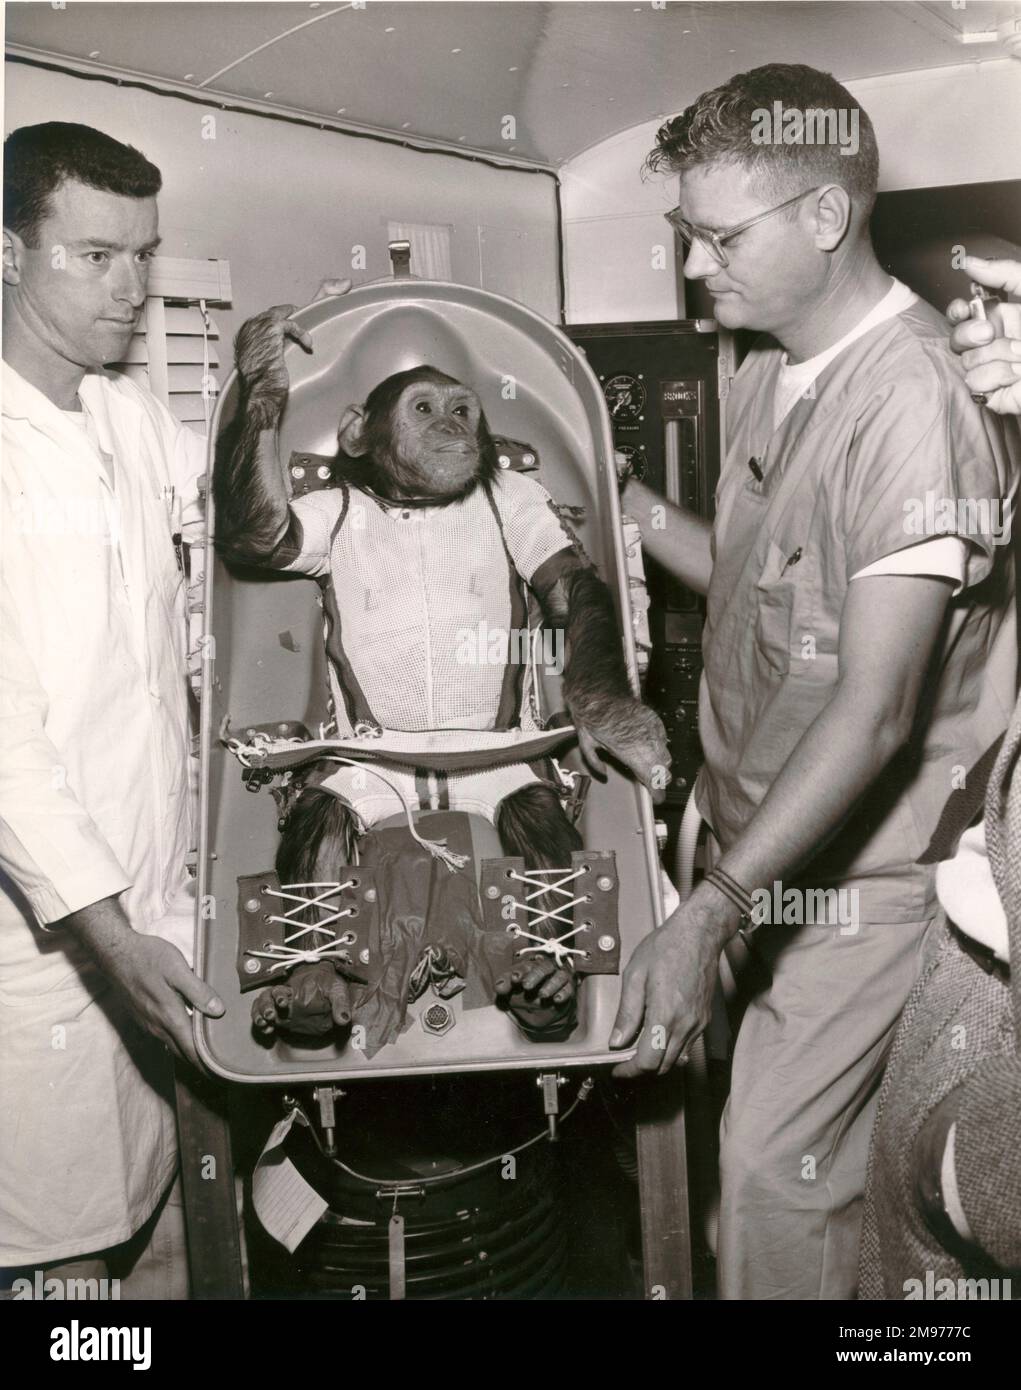 Ham - a 37-pound chimpanzee - became America’s first ‘astronaut’ when he was launched from Cape Canaveral aboard the Mercury-Redstone (MR-2) suborbital flight on 31 January 1961. In a memo written the next day, NASA’s Warren J. North noted: “Ham appeared to be in good physiological condition but sometime later when he was shown the spacecraft it was visually apparent that he had no further interest in co-operating with the space-flight program.” Stock Photo